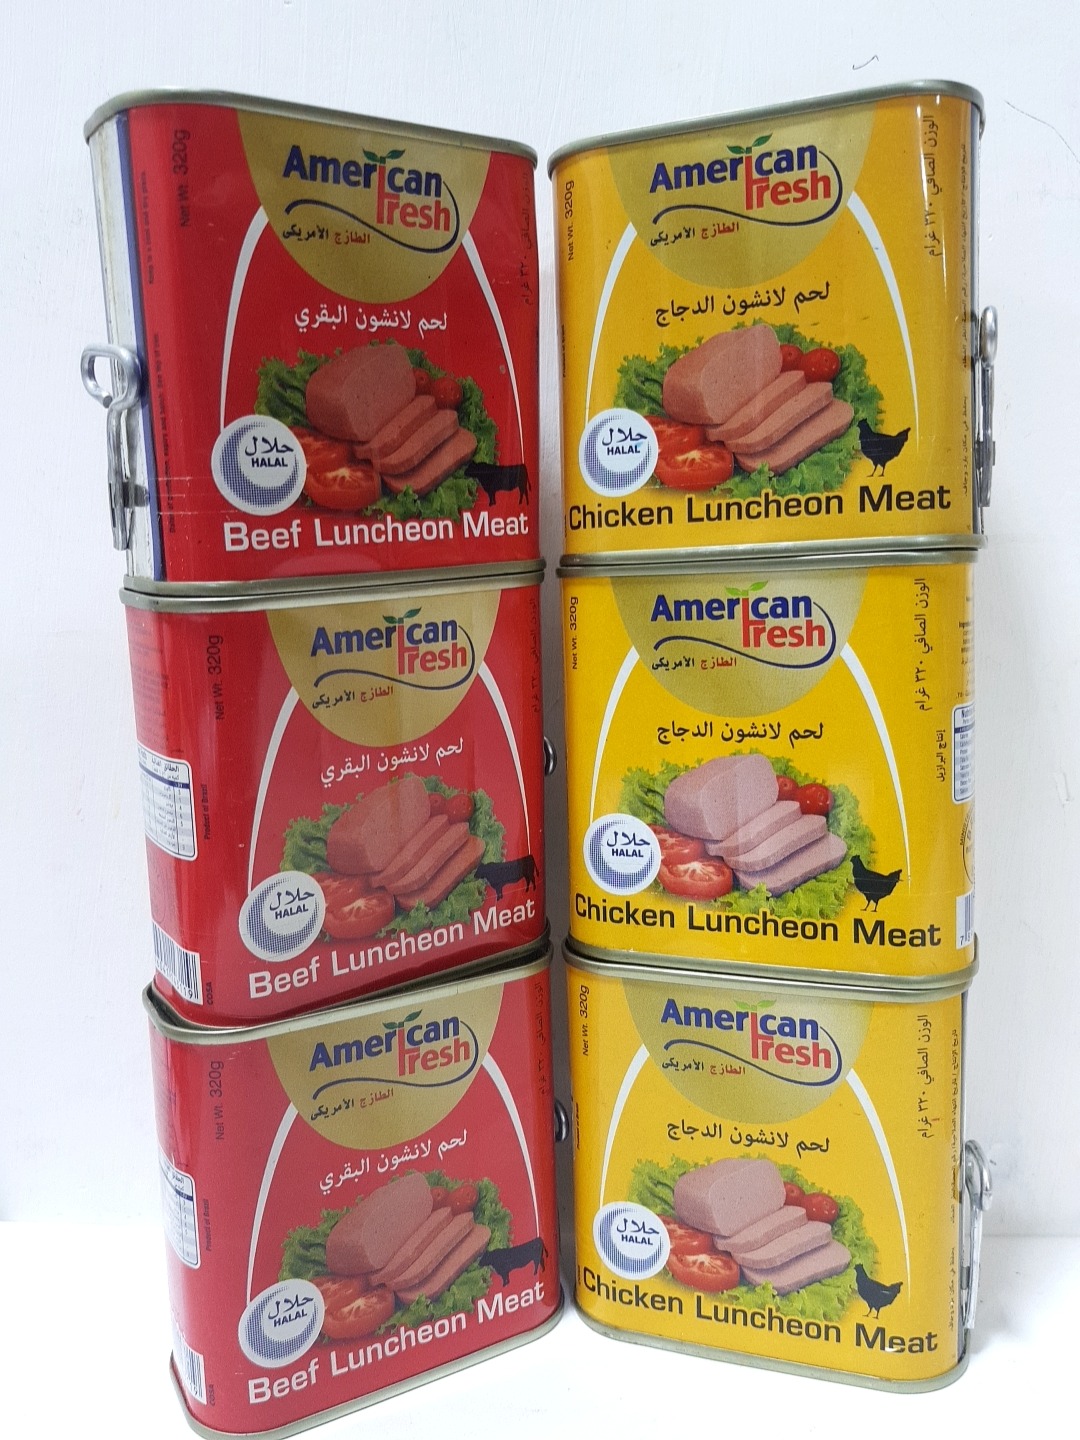 (FOOD) 6 Pcs Bundle American Farm Chicken and Beef Luncheon Meat Halal (6X320G) (Cargo)